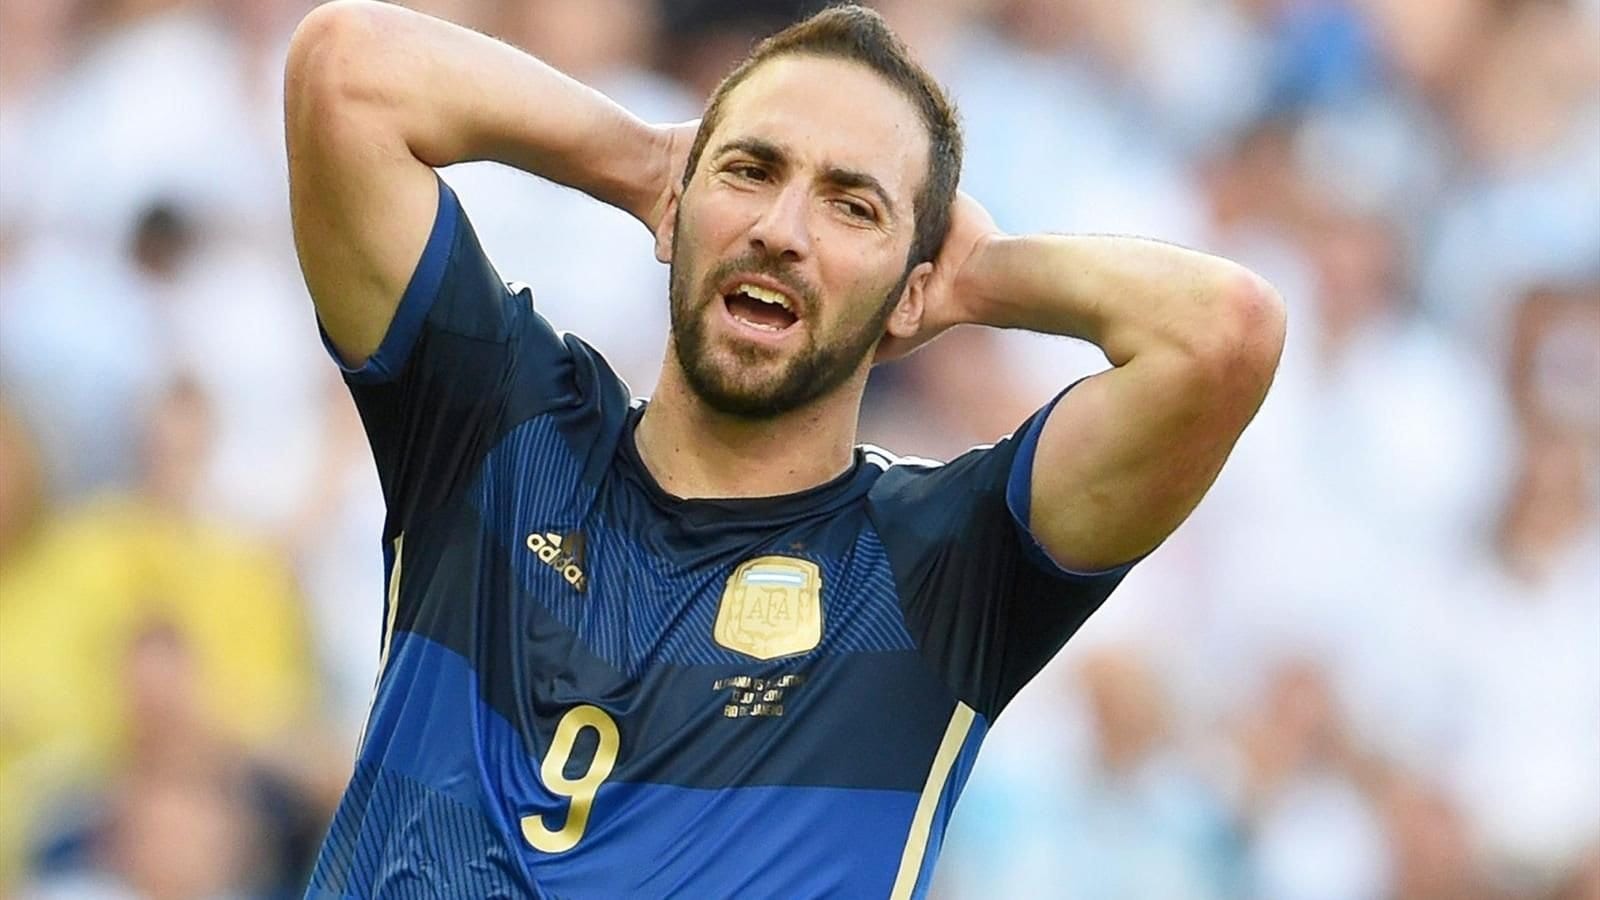 Gonzalo Higuain set to take retirement from professional football at the end of the 2022 season, claims his father Jorge Higuain